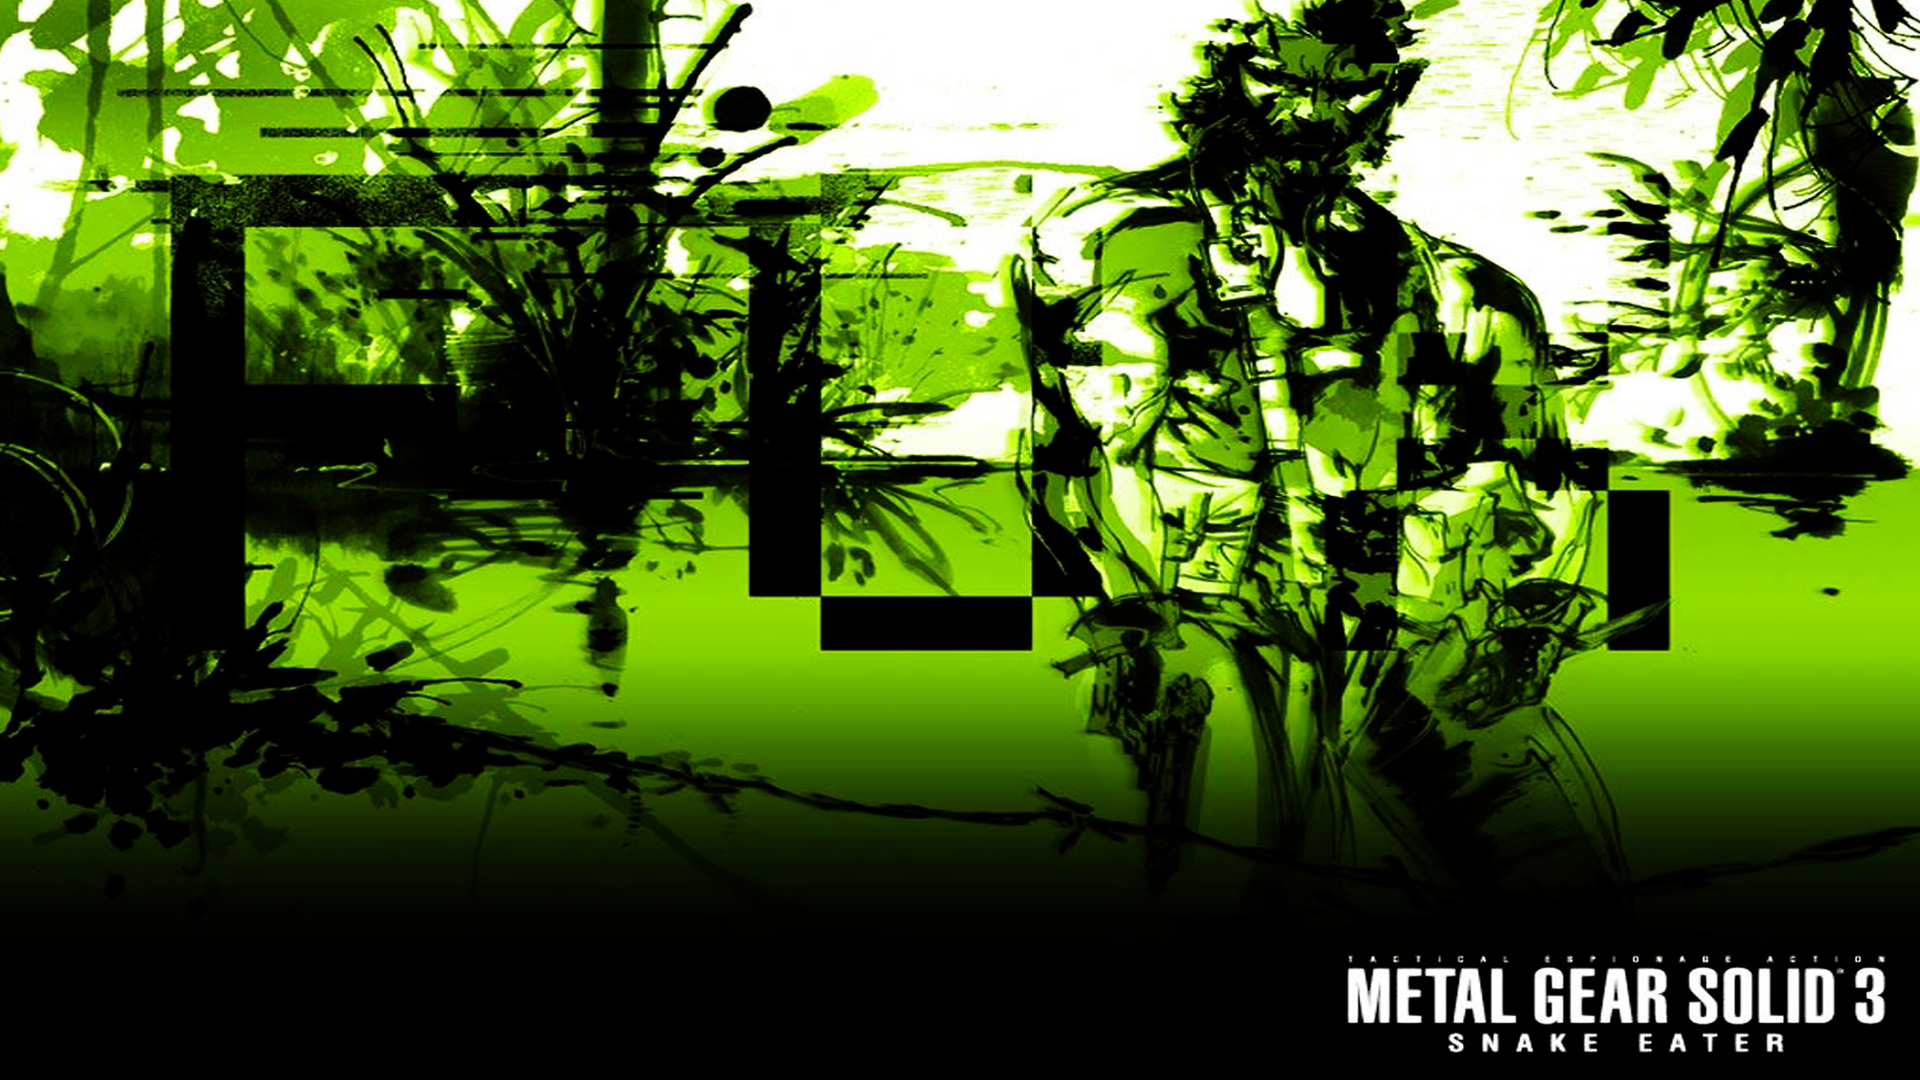 Metal Gear Solid 3: Snake Eater Wallpapers